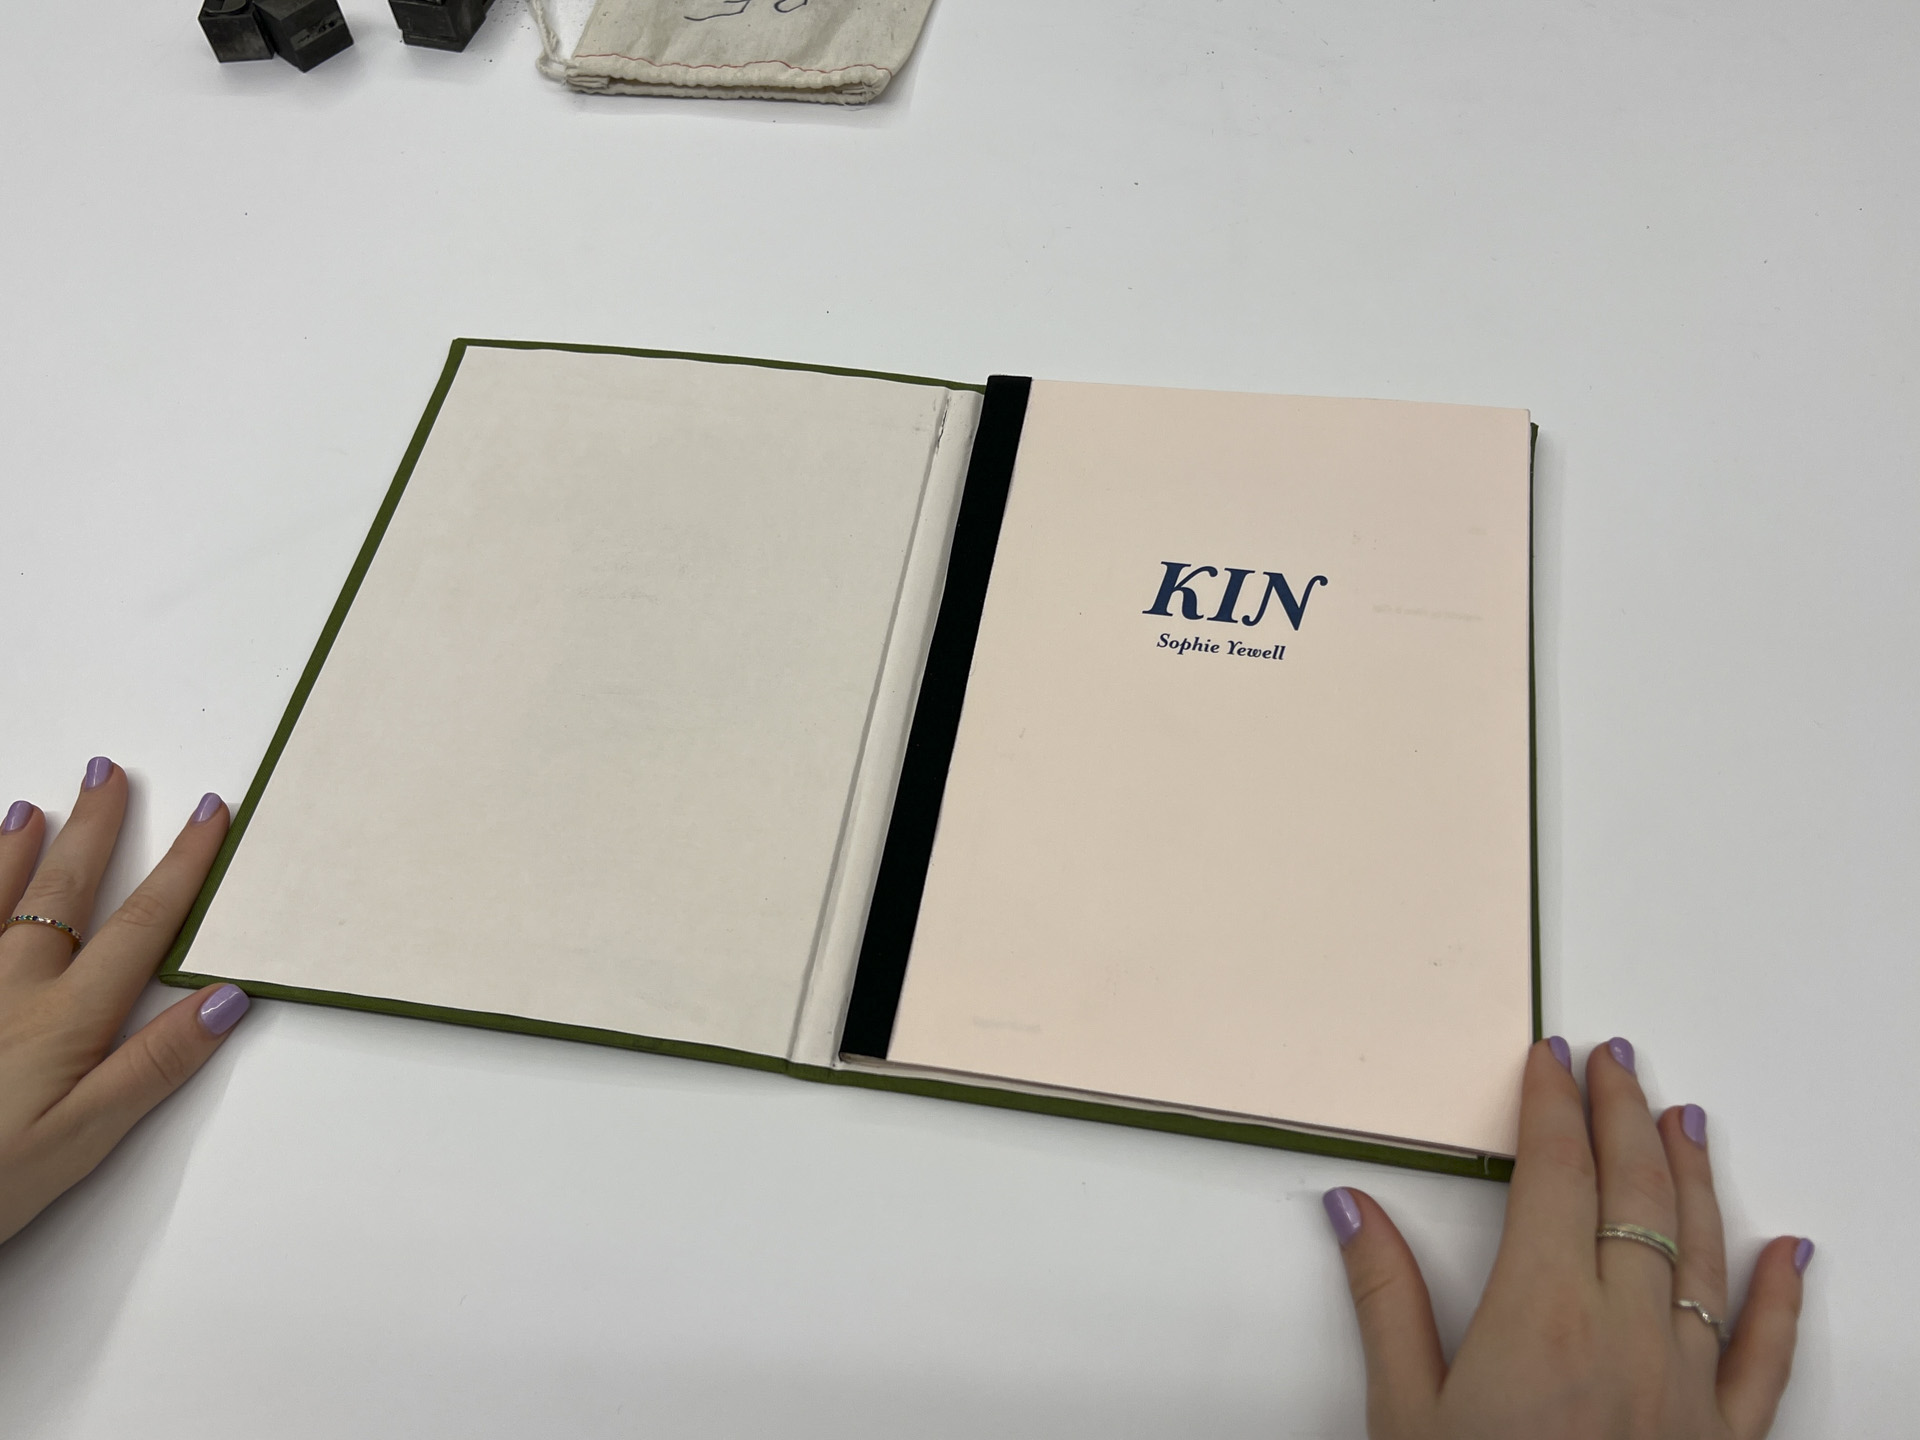 photo of interior of book with text stating "kin sophie yewell"